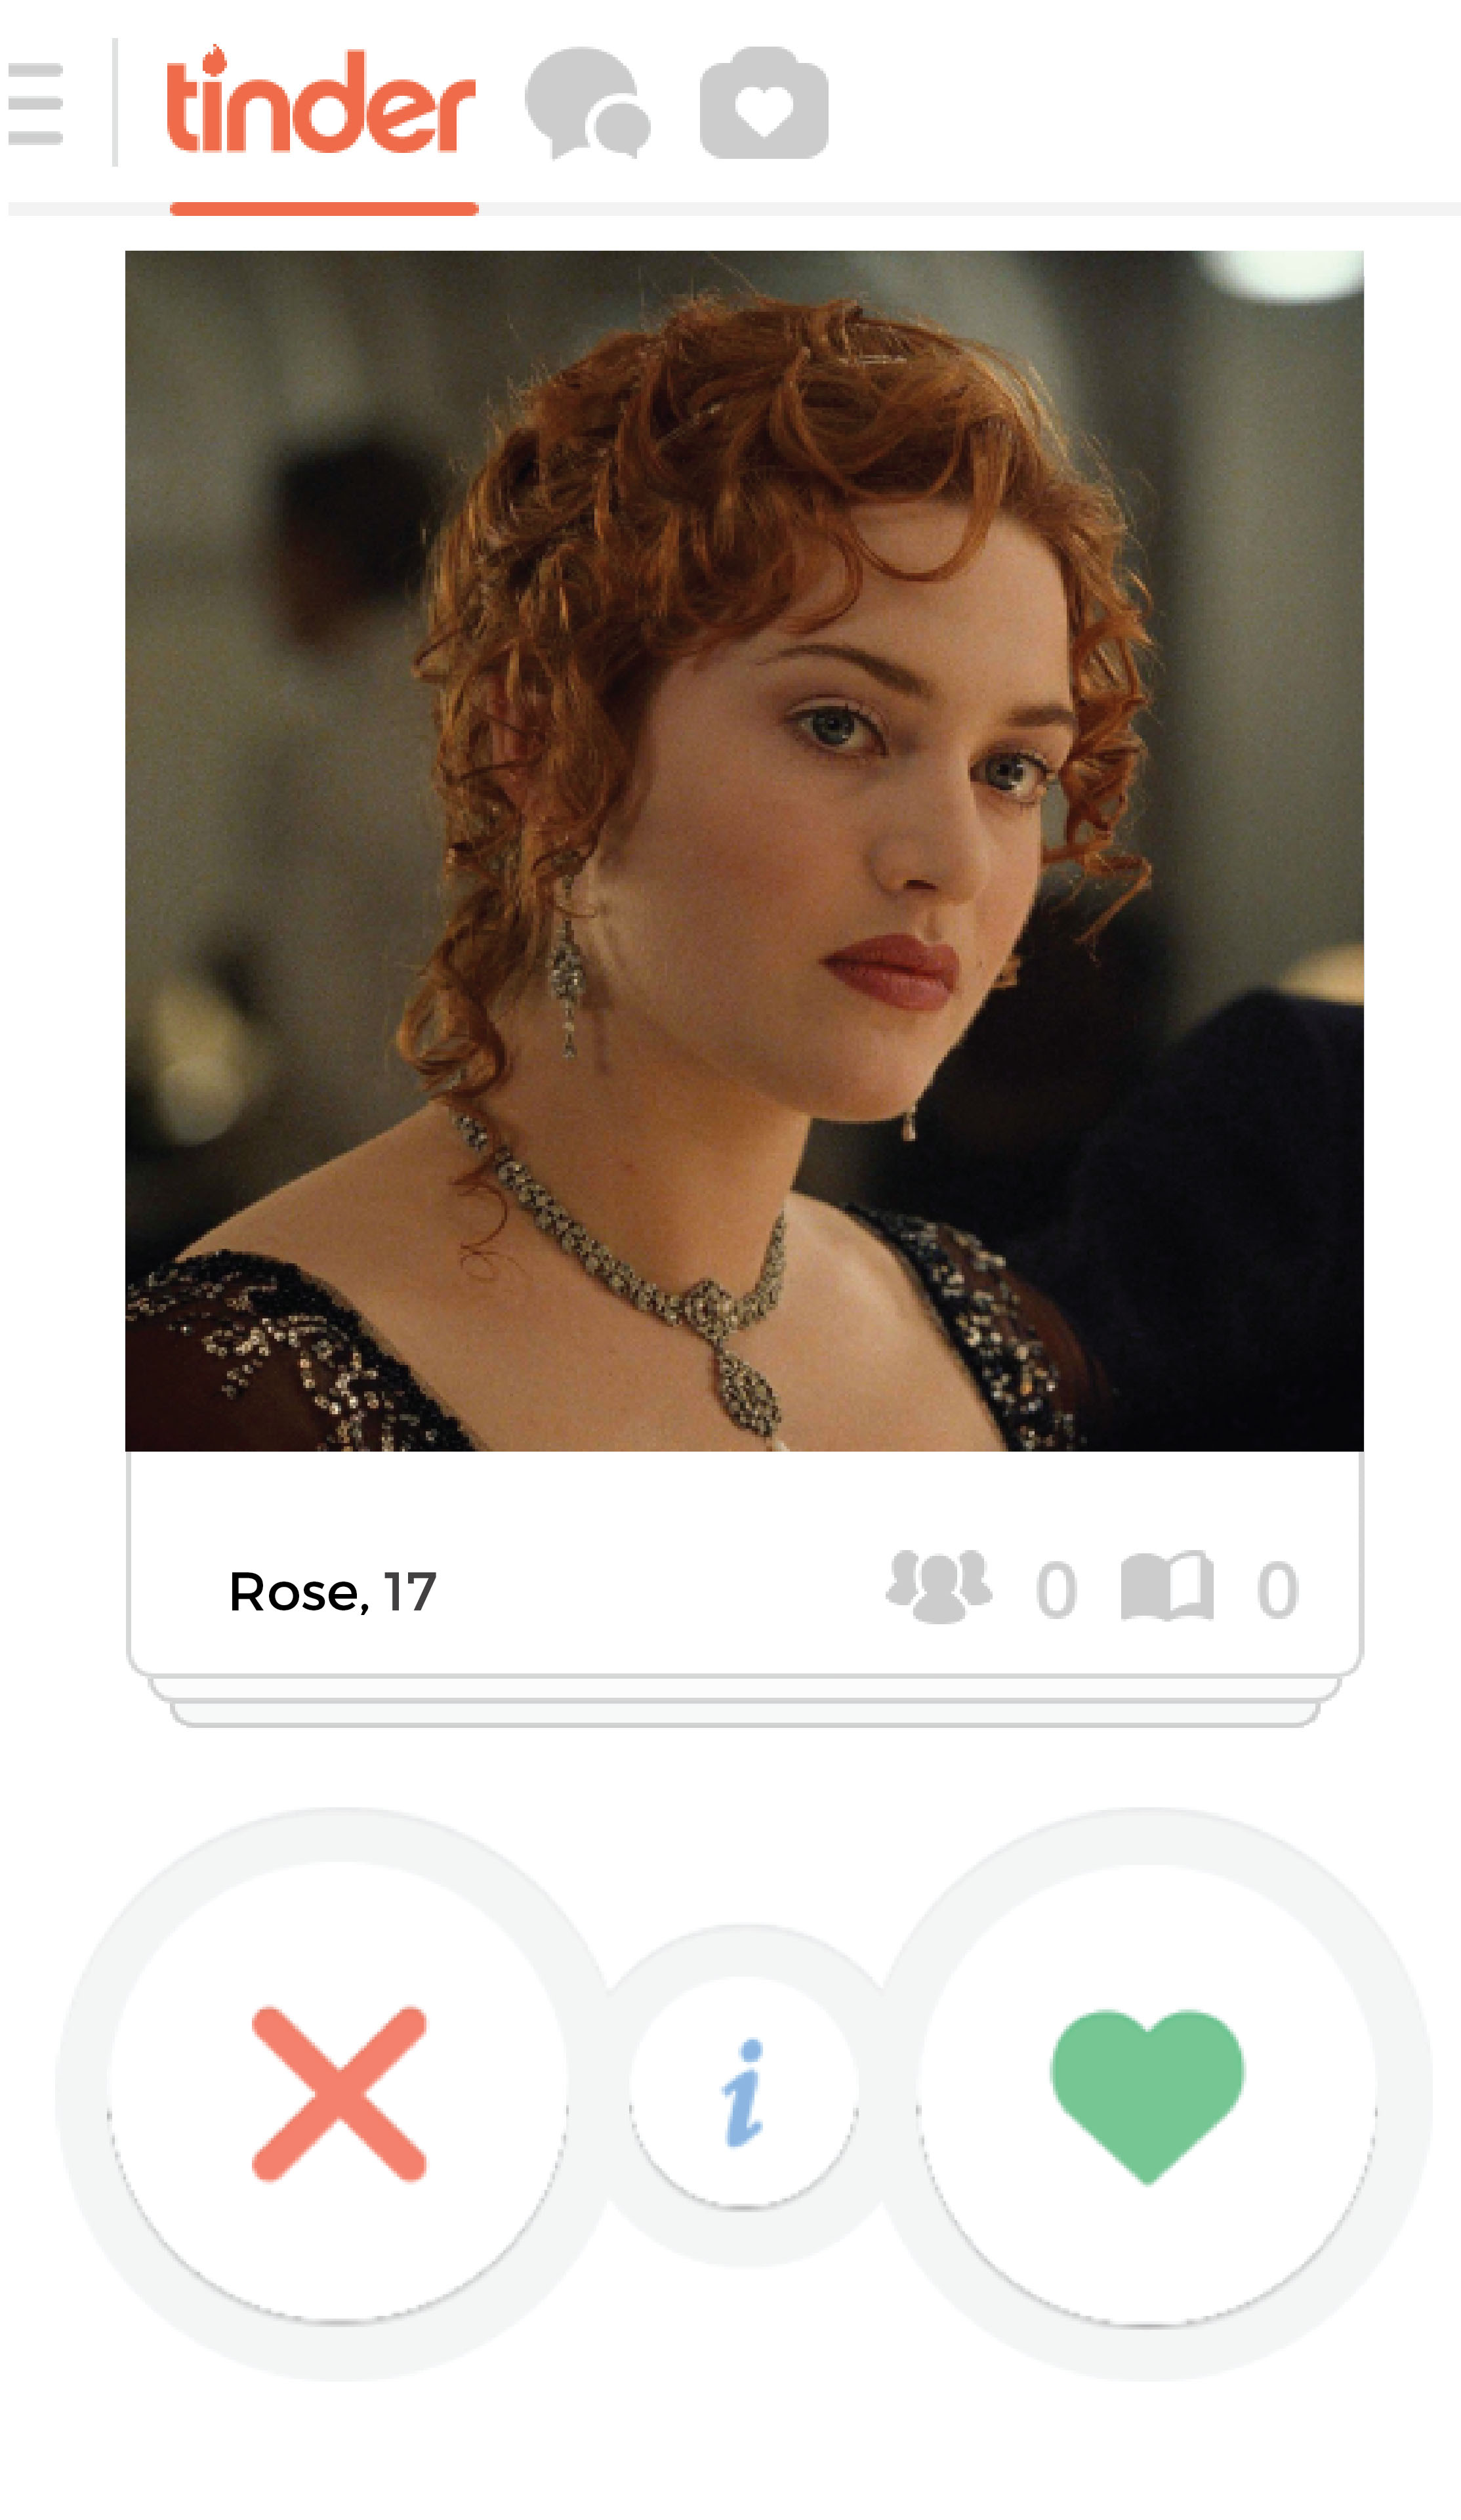 A Tinder profile for Rose, Kate Winslet's character in "Titanic"